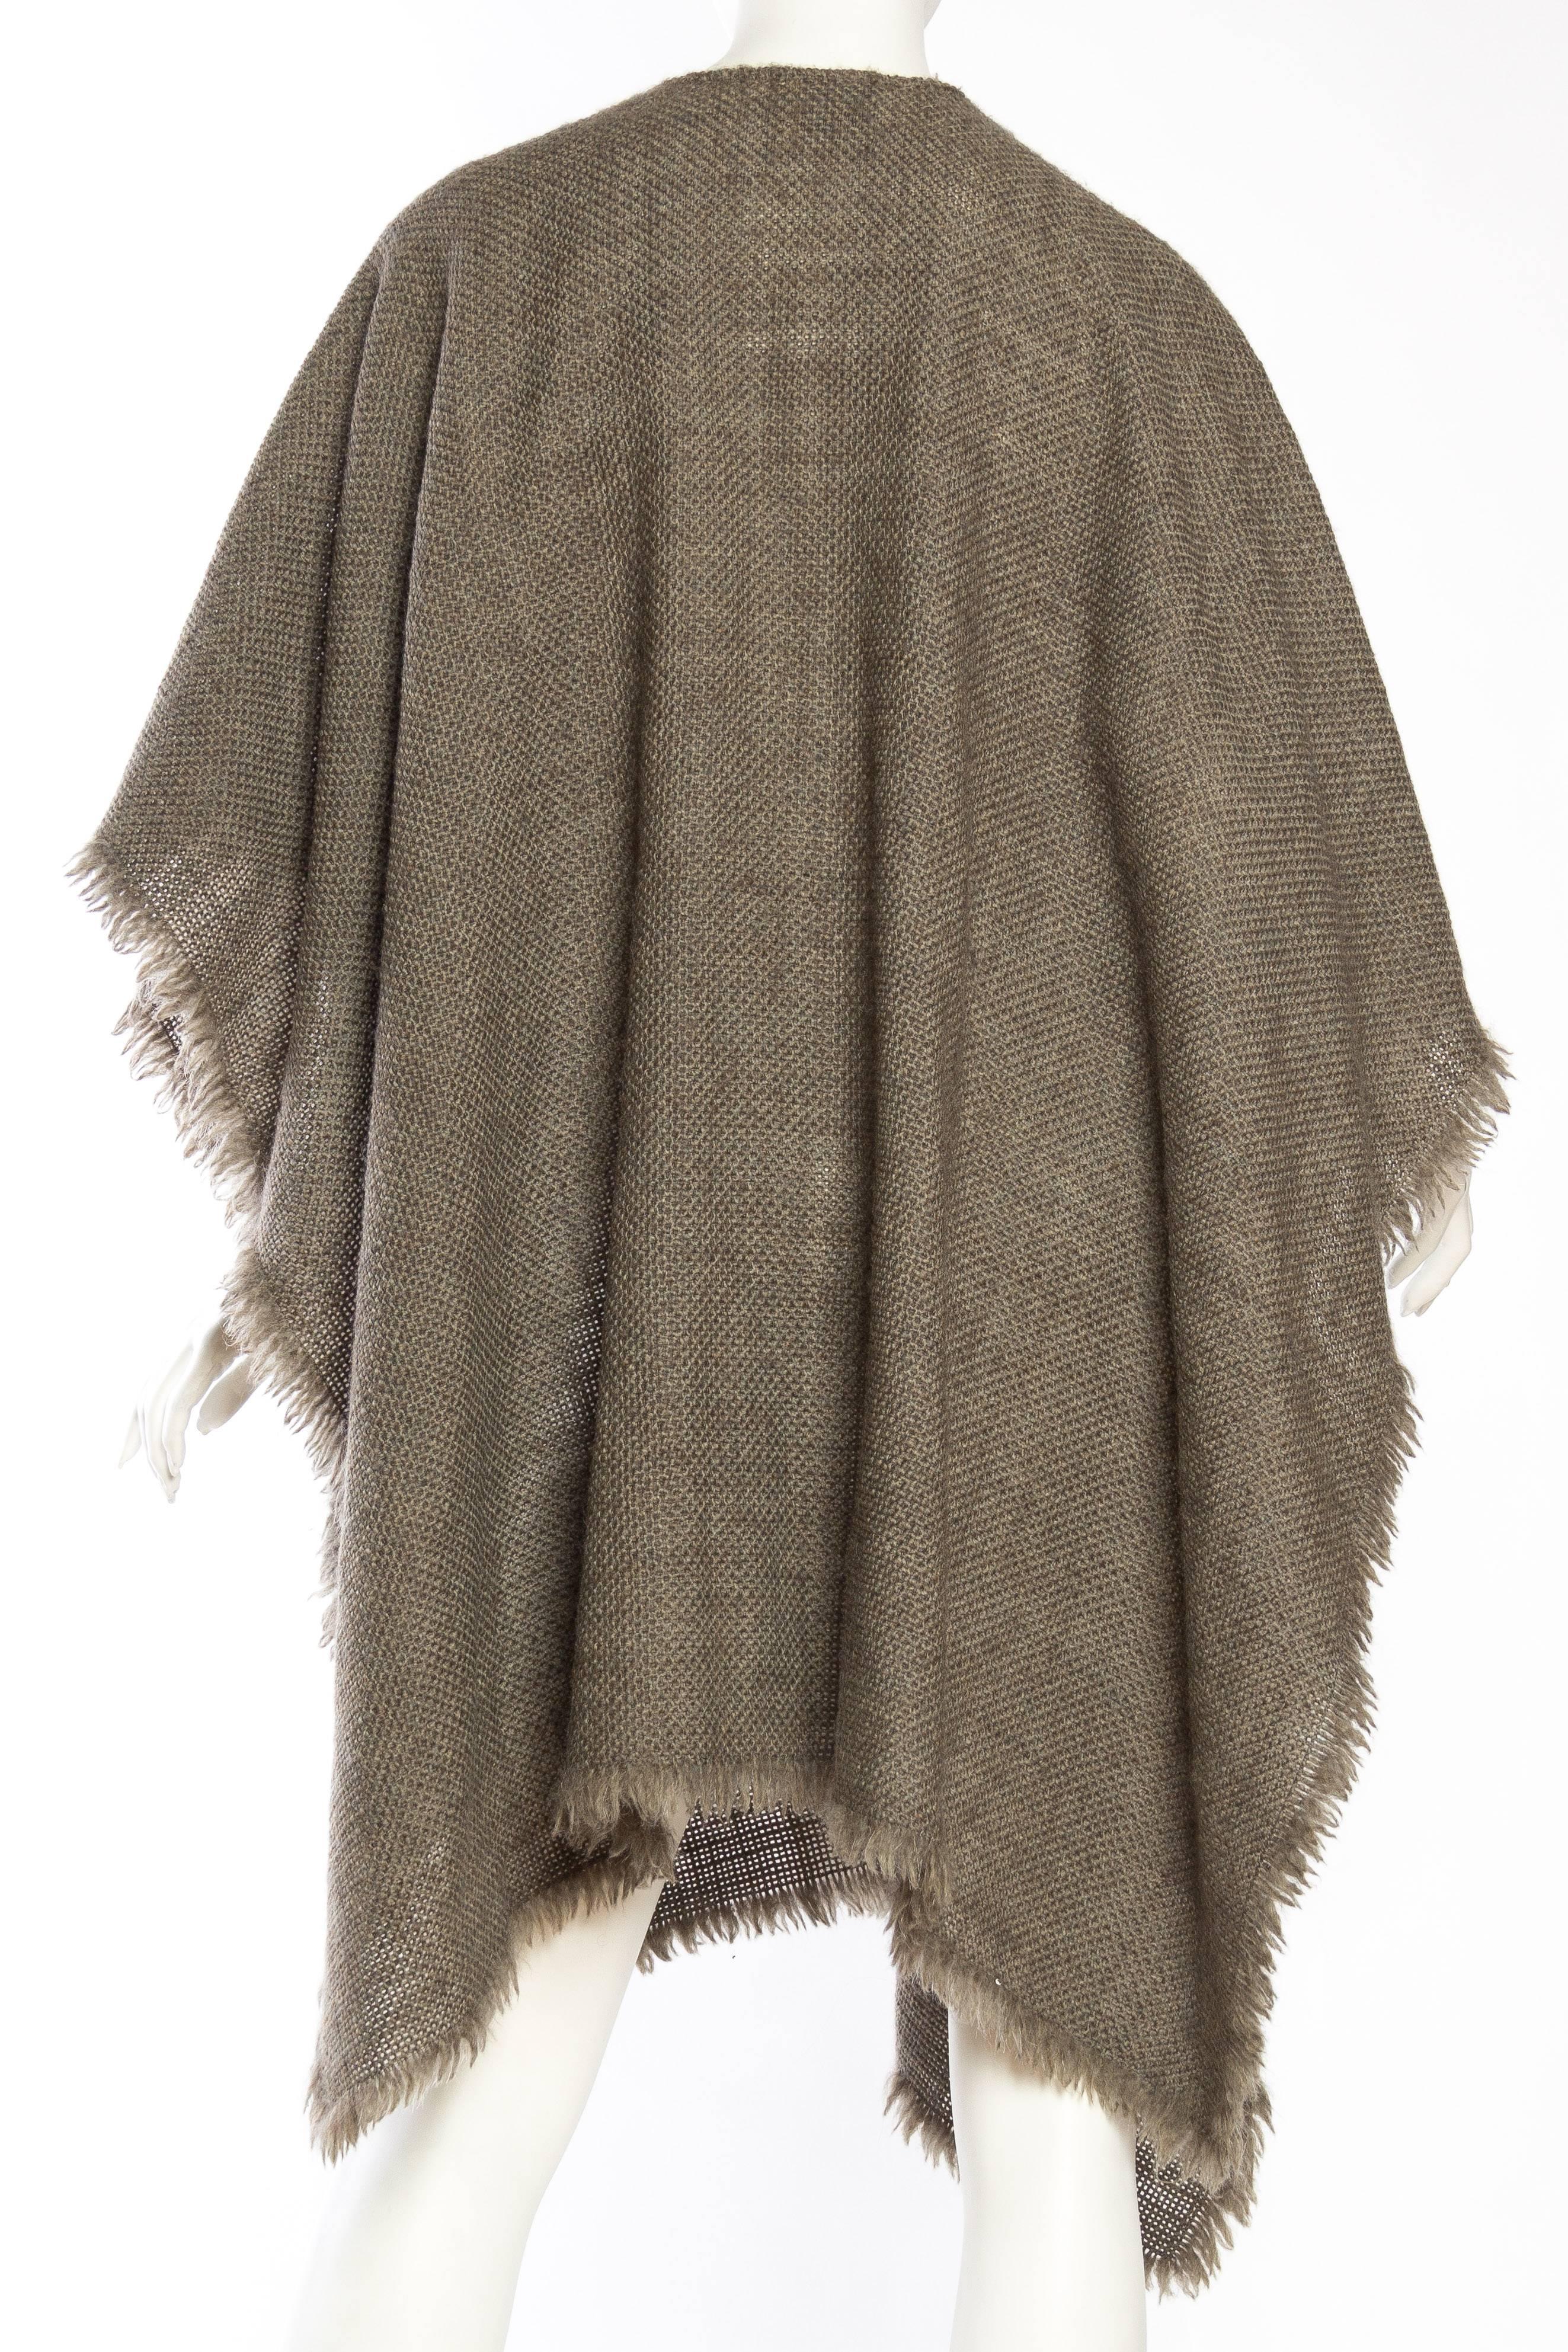 Gray 1980S ARMANI Light Weight Wool Blend Wrap Cape Shawl For Sale